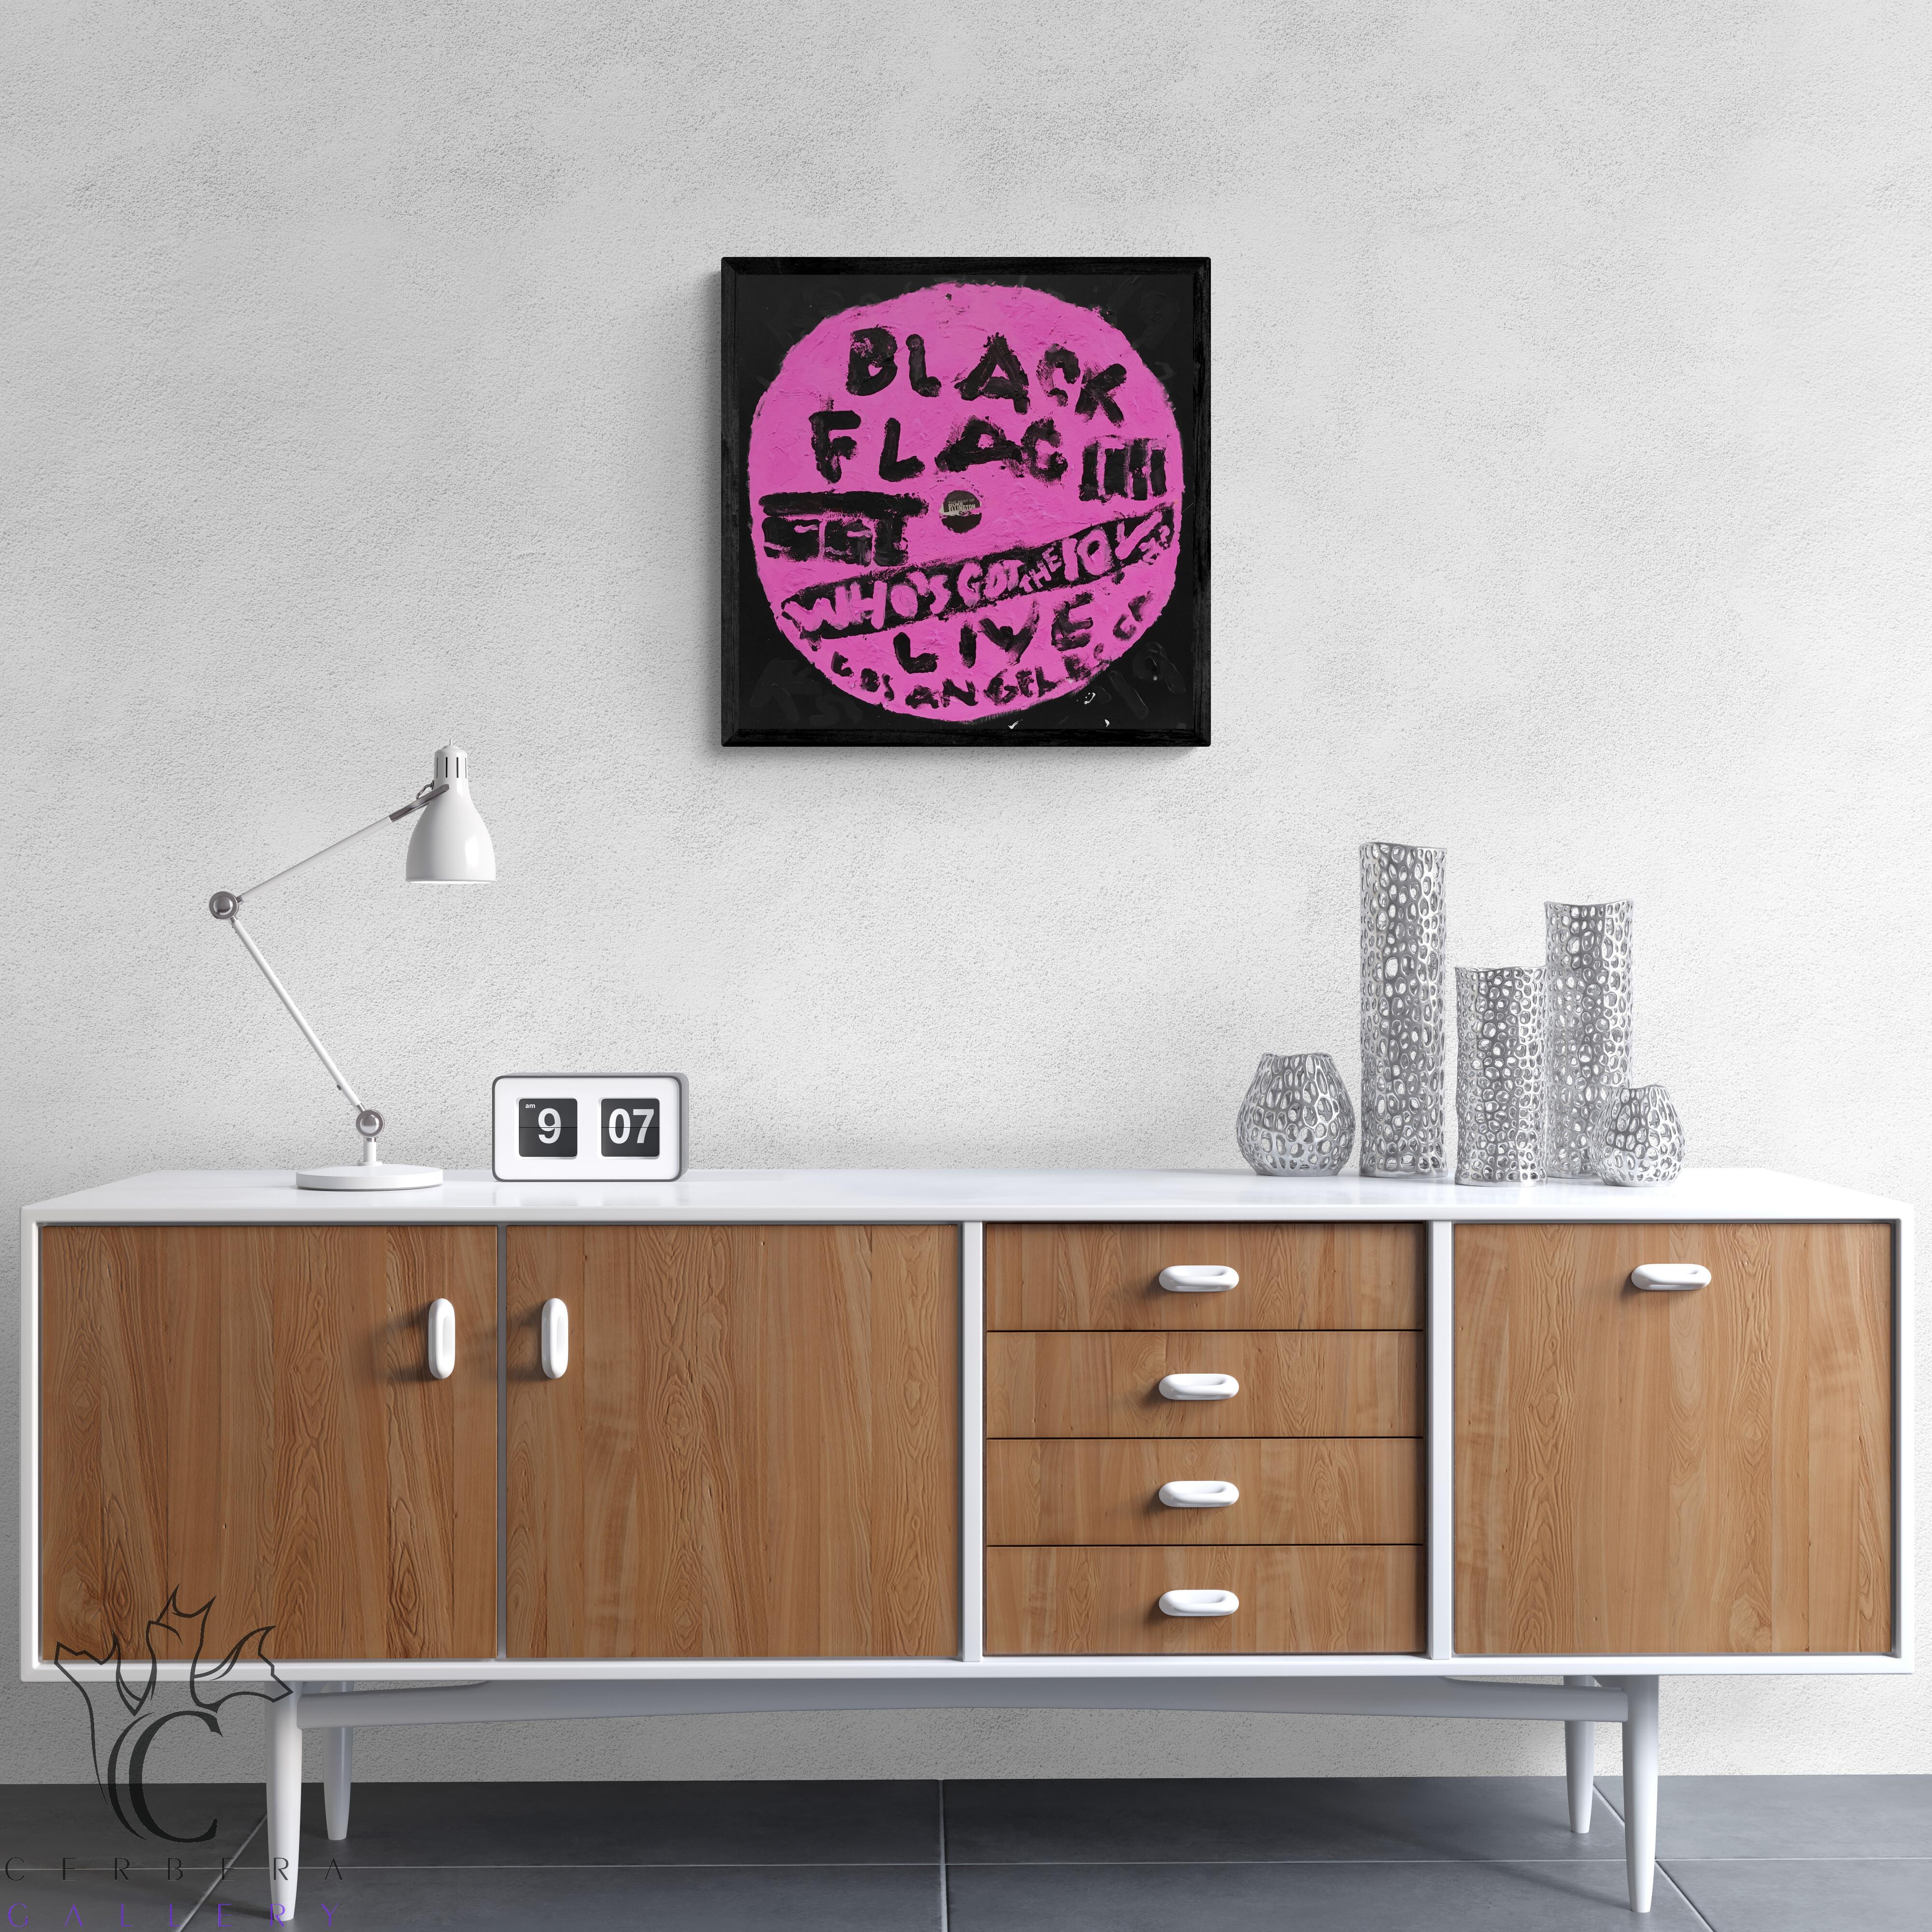 Black Flag - Who's Got The 10 1/2? (Grammy, Albumkunst, Ikonisches, Rock and Roll) – Painting von Kerry Smith